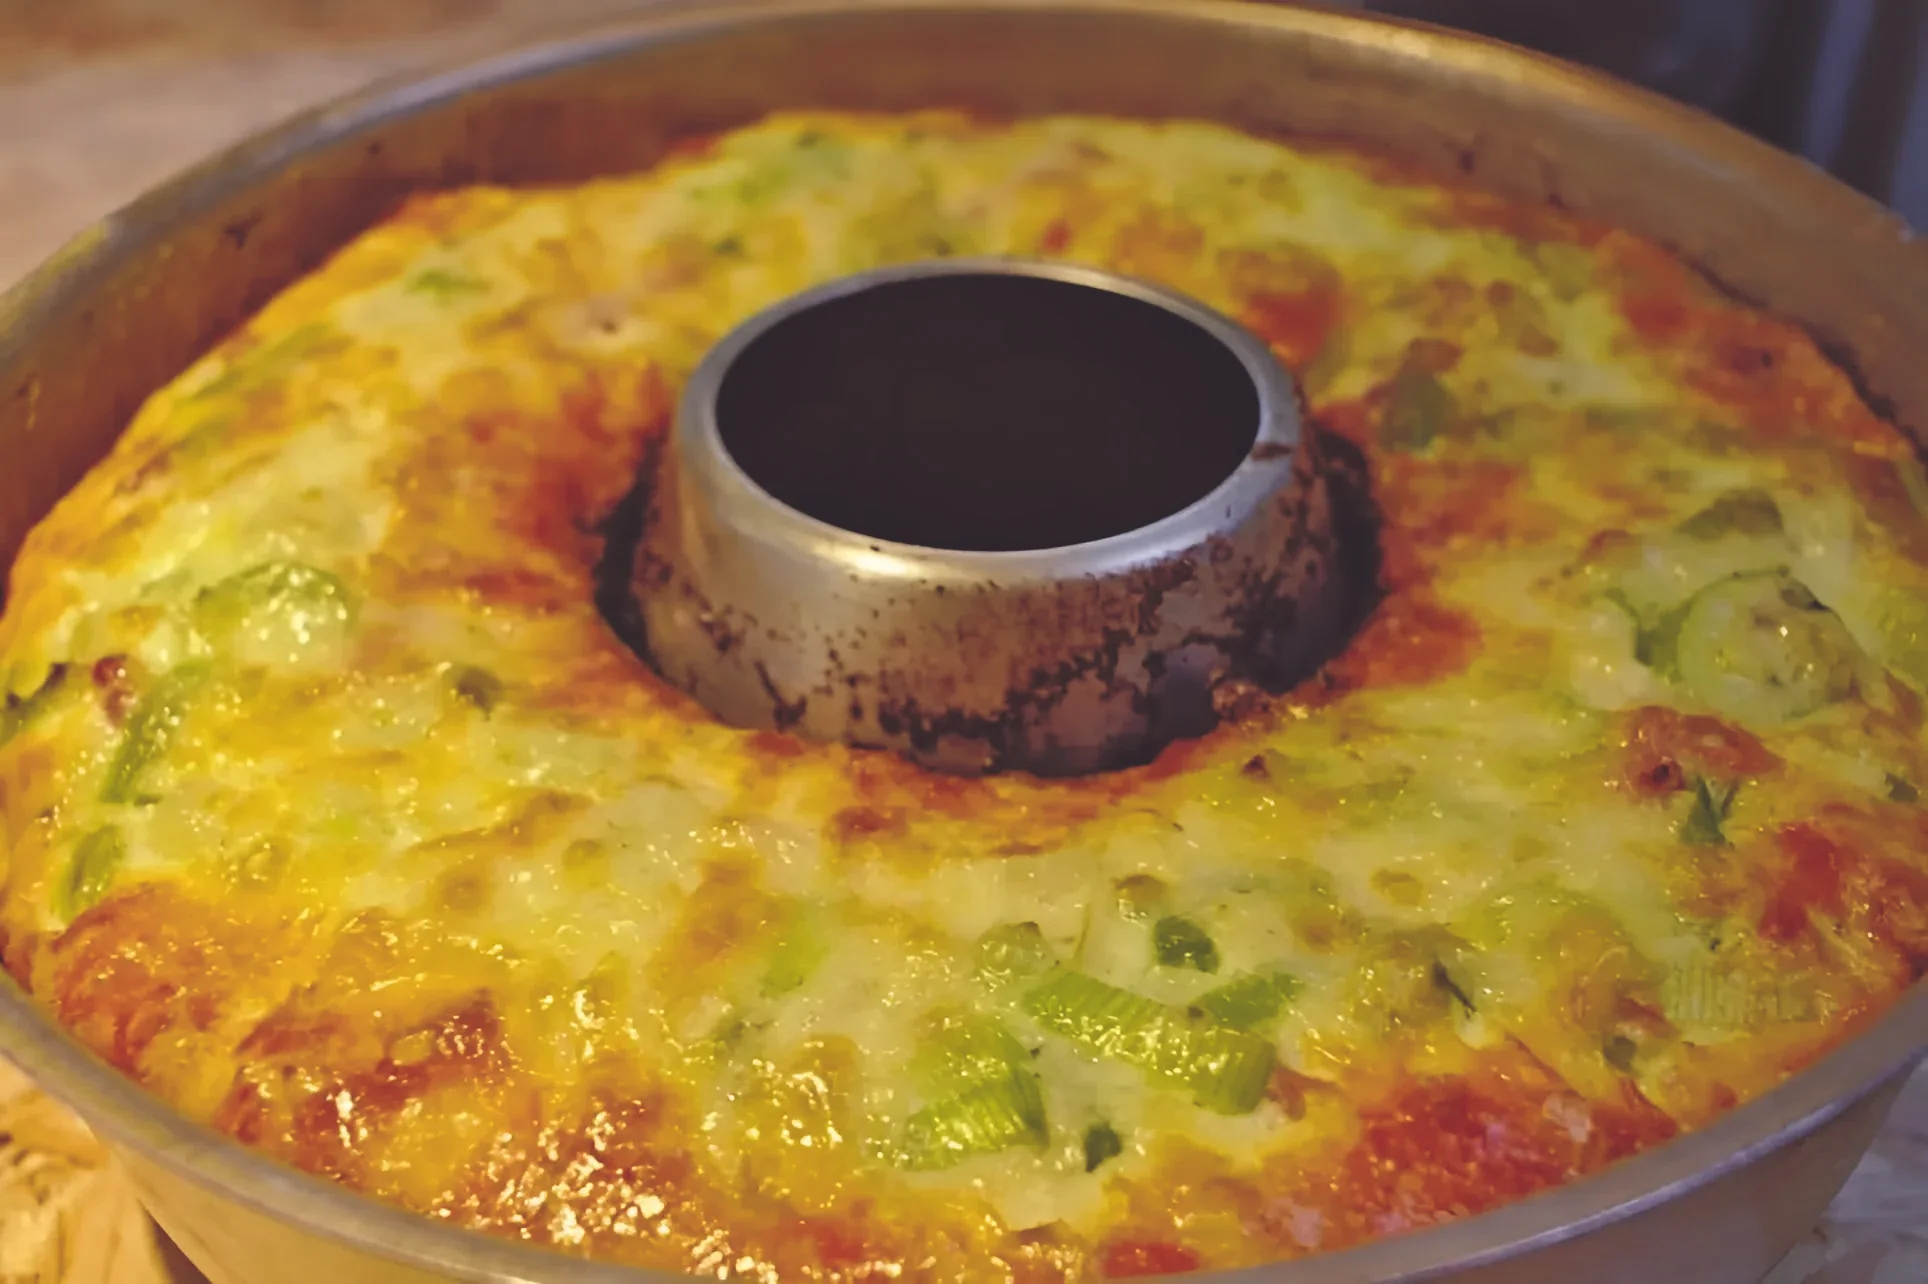 Featured image for “Lauch-Käse-Quiche”